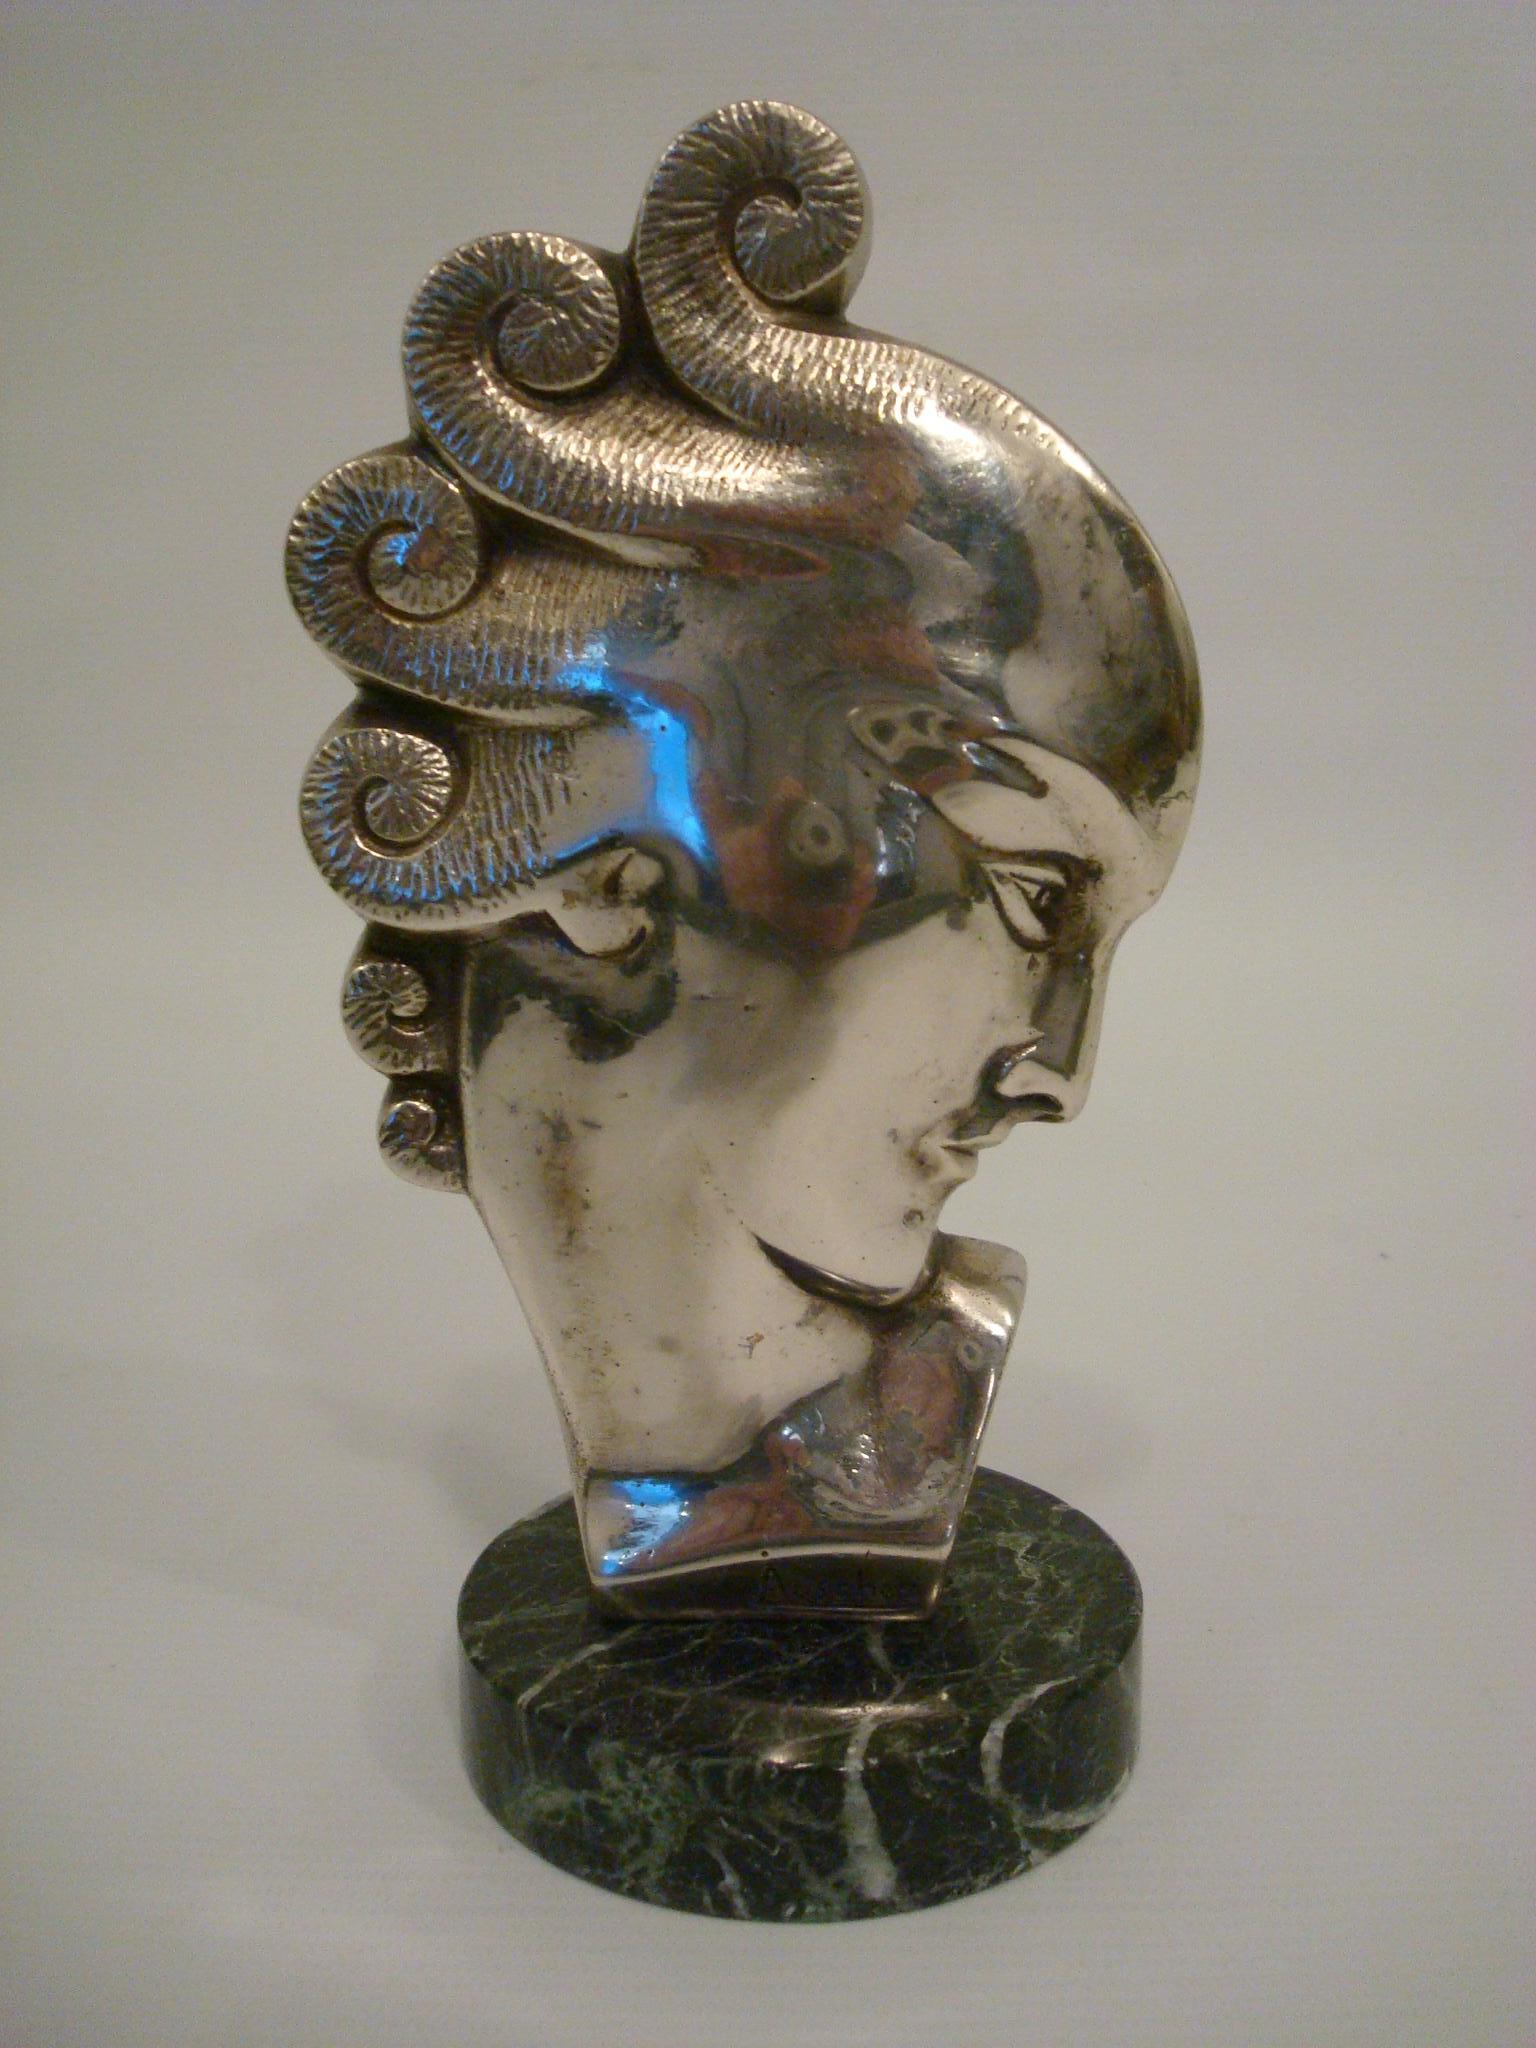 Art Deco bust of a woman. Silvered bronze sculpture of a moderniste lady.
Mounted over a Italian marble base. Signed on the base Auscher. France 1930
Perfect desk piece or paperweight.